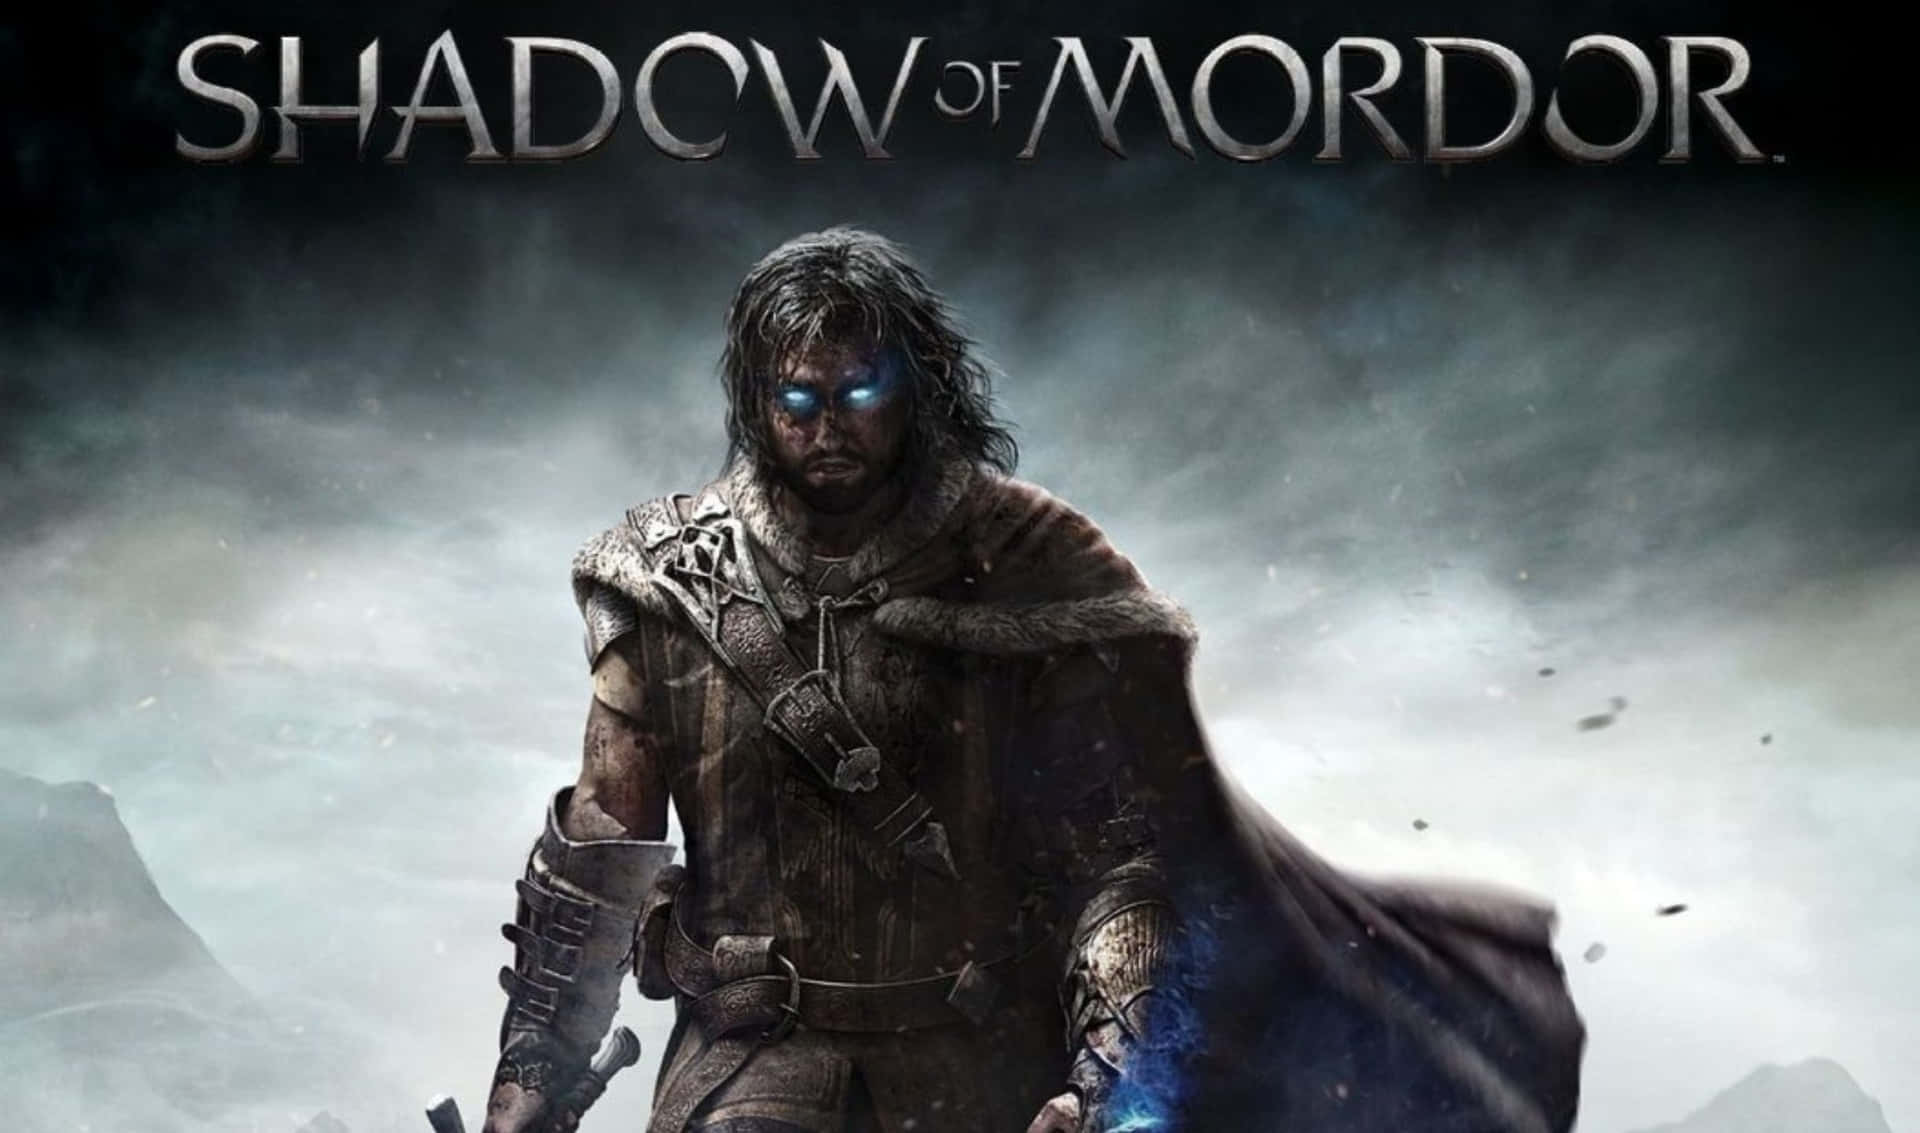 Ride into battle and fight the forces of Mordor in Shadow of Mordor!